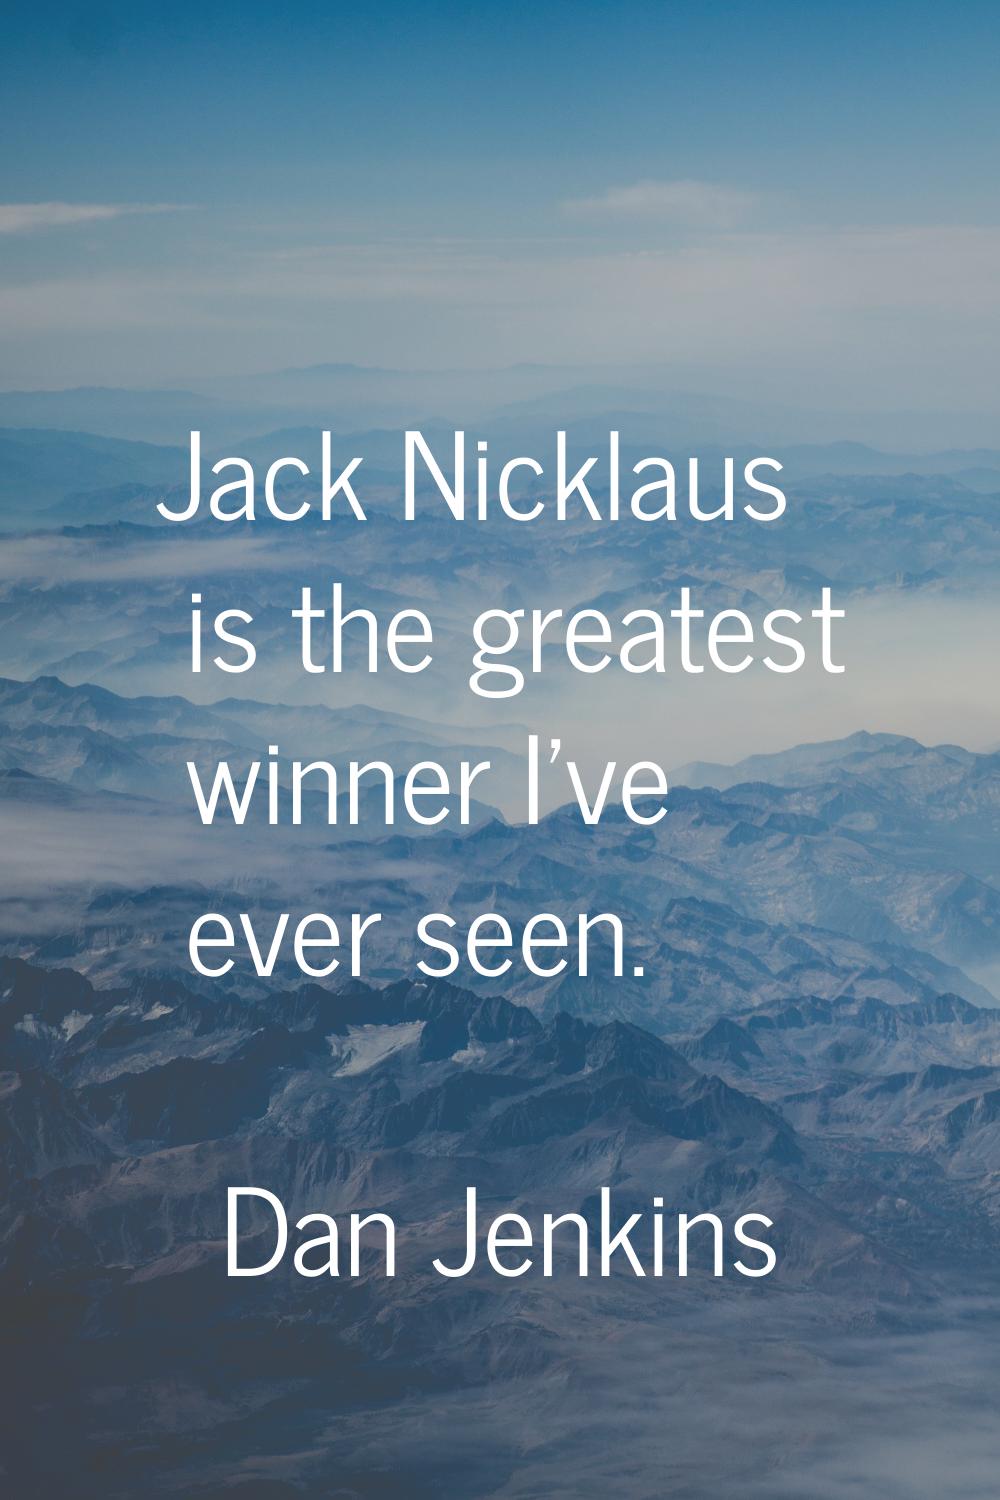 Jack Nicklaus is the greatest winner I've ever seen.